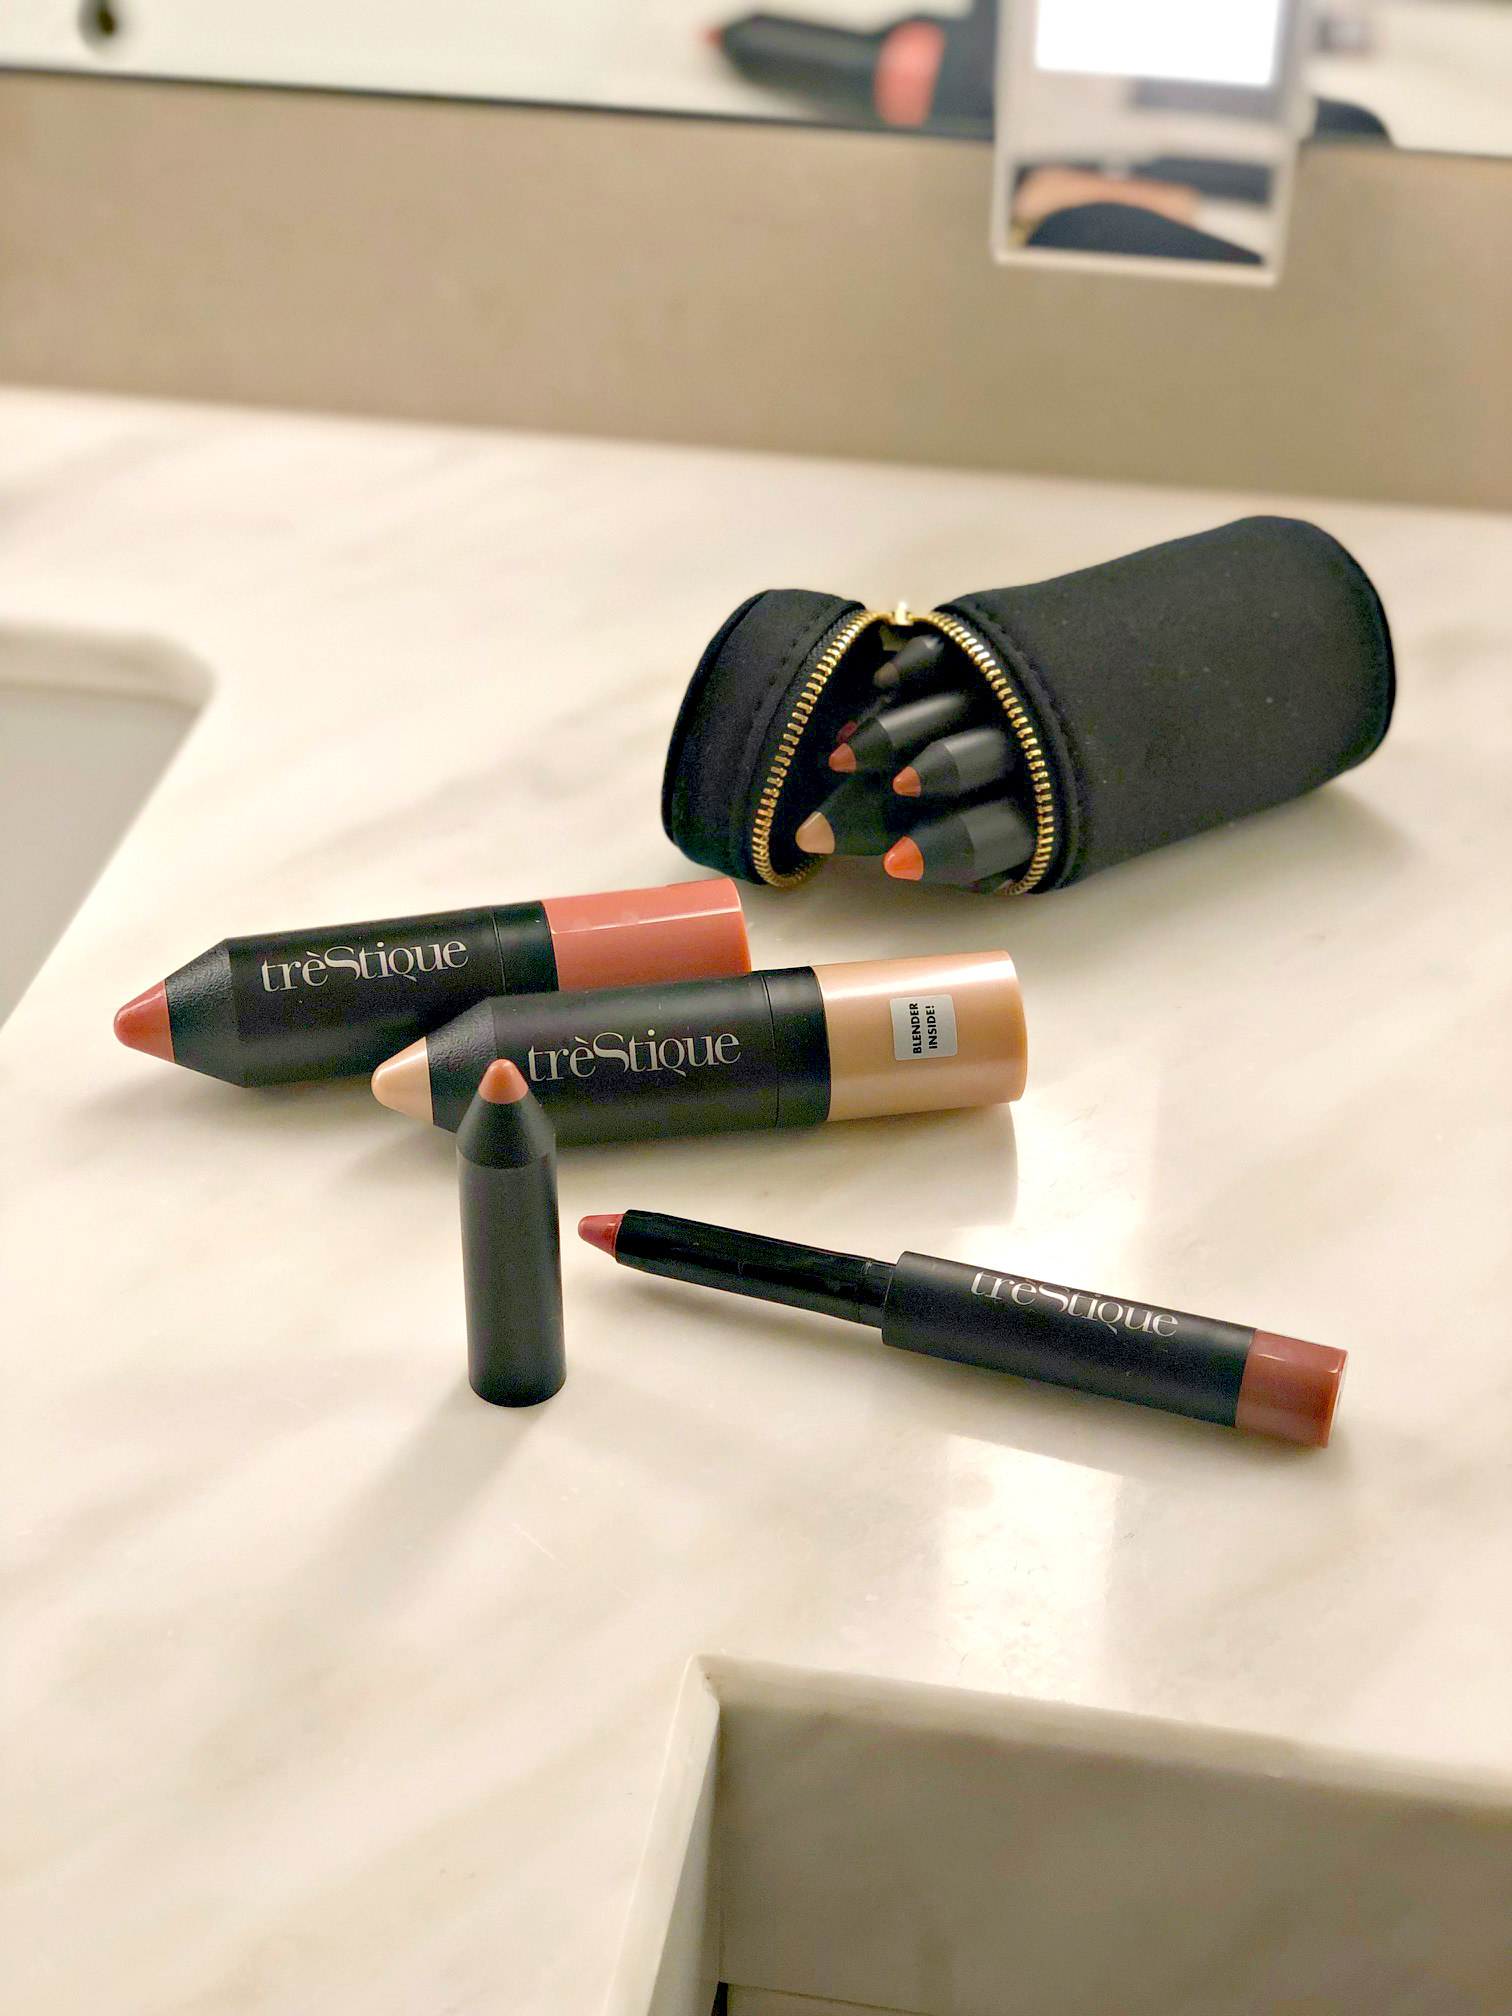 Beauty Blogger, Jamie Lewinger of More Than Turquoise, traveling with TreStiQue makeup